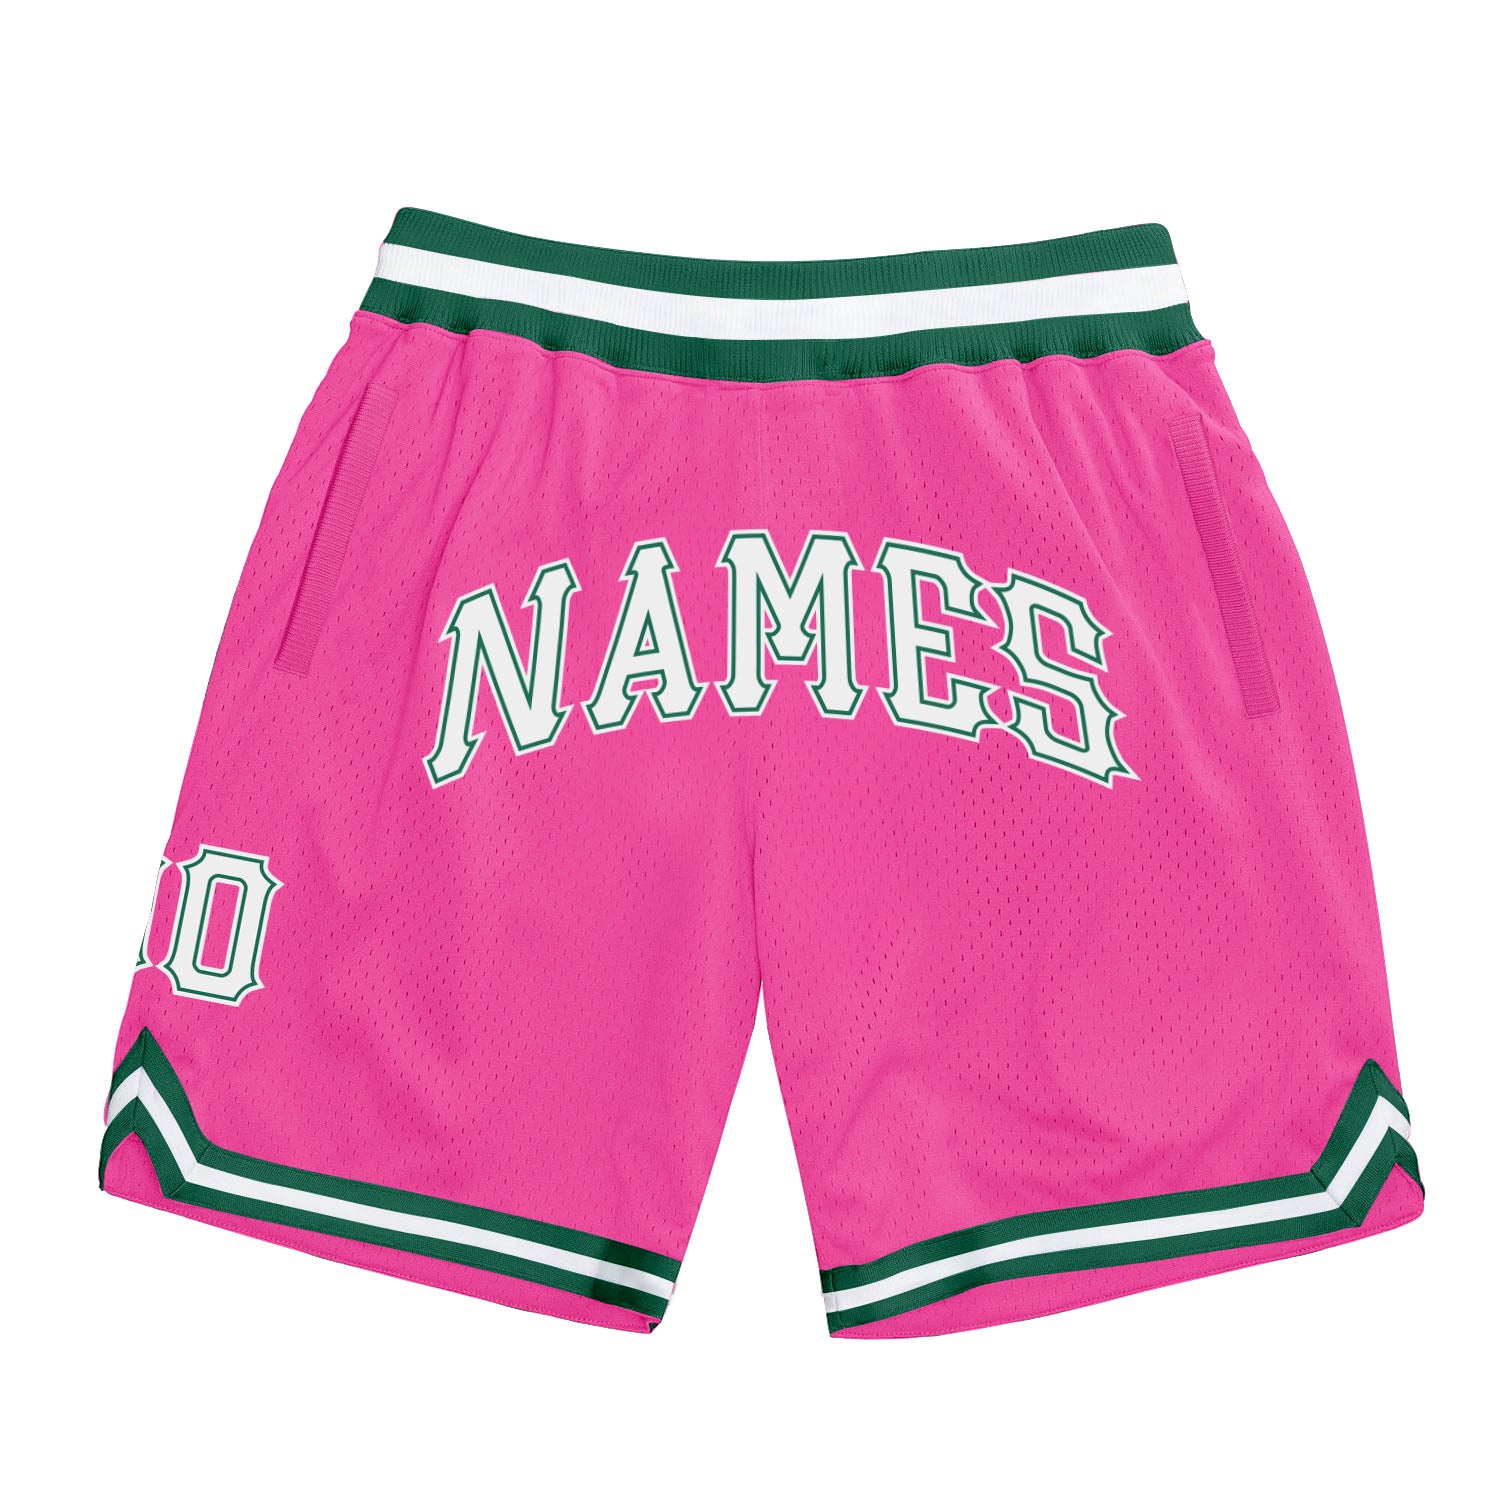 New Off Brand Dior Basketball Lightweight Shorts Pink/White Size XLarge